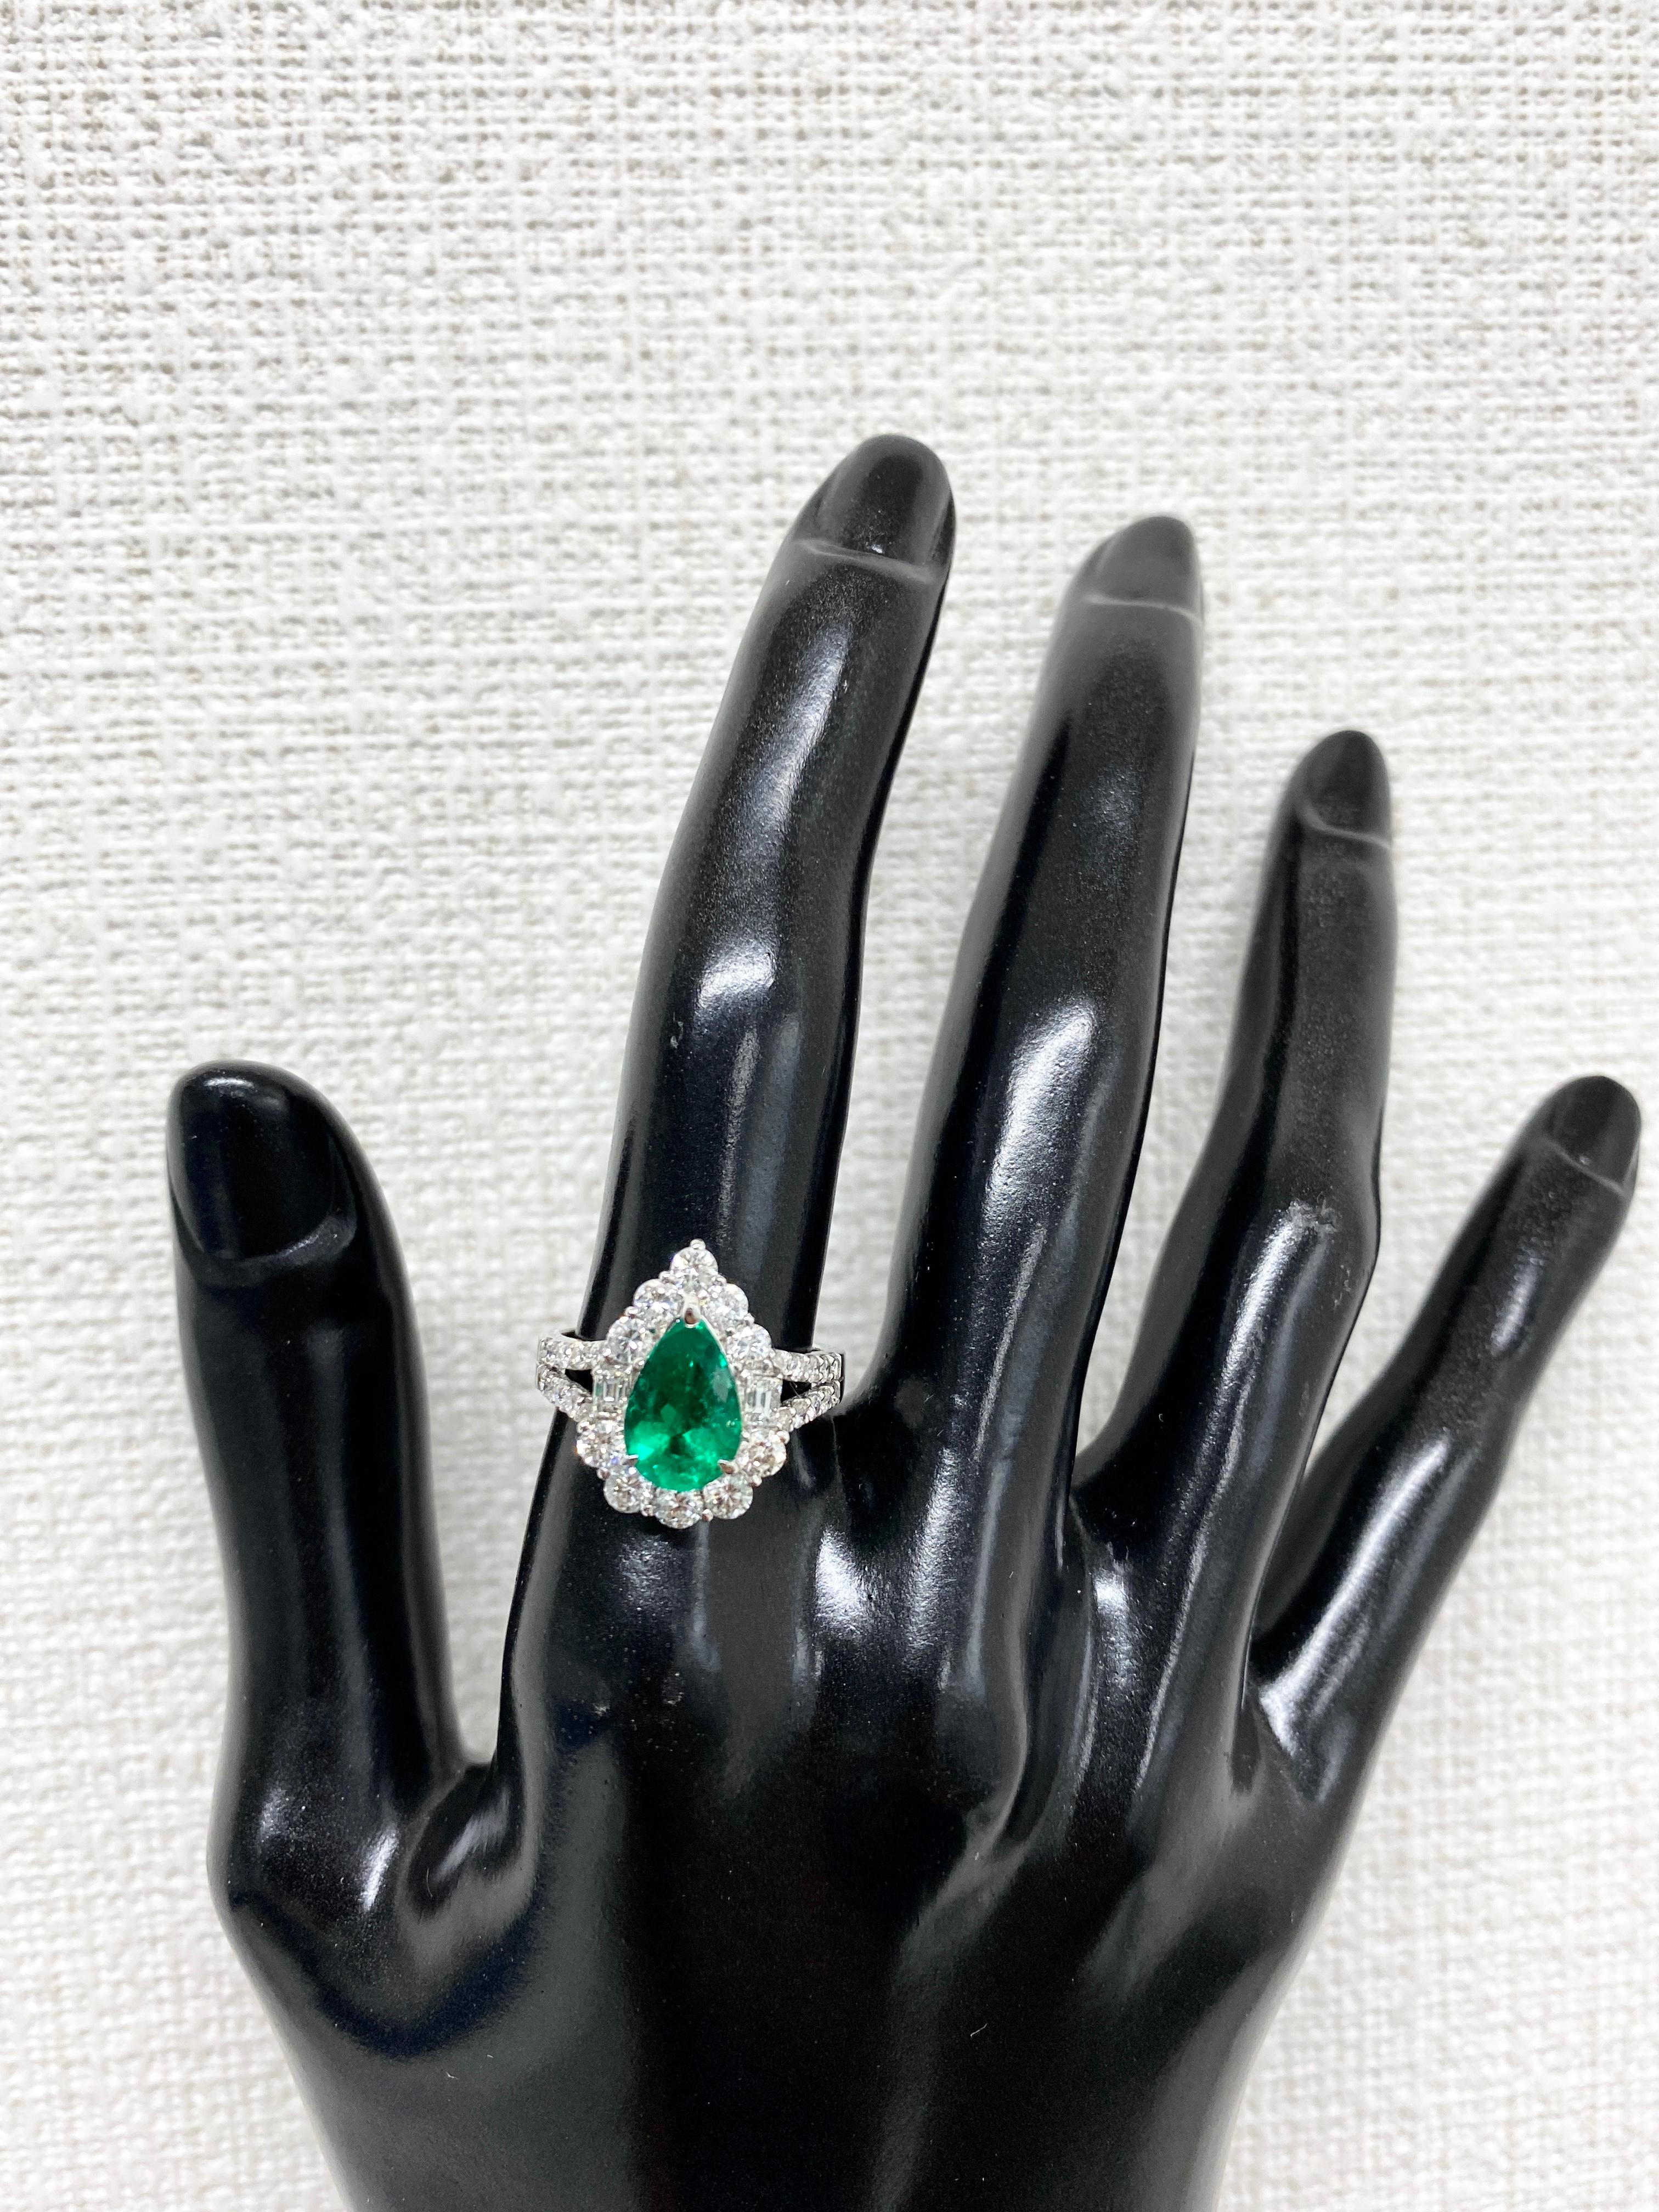 Women's 1.64 Carat Natural Pear Shape Emerald and Diamond Ring Set in Platinum